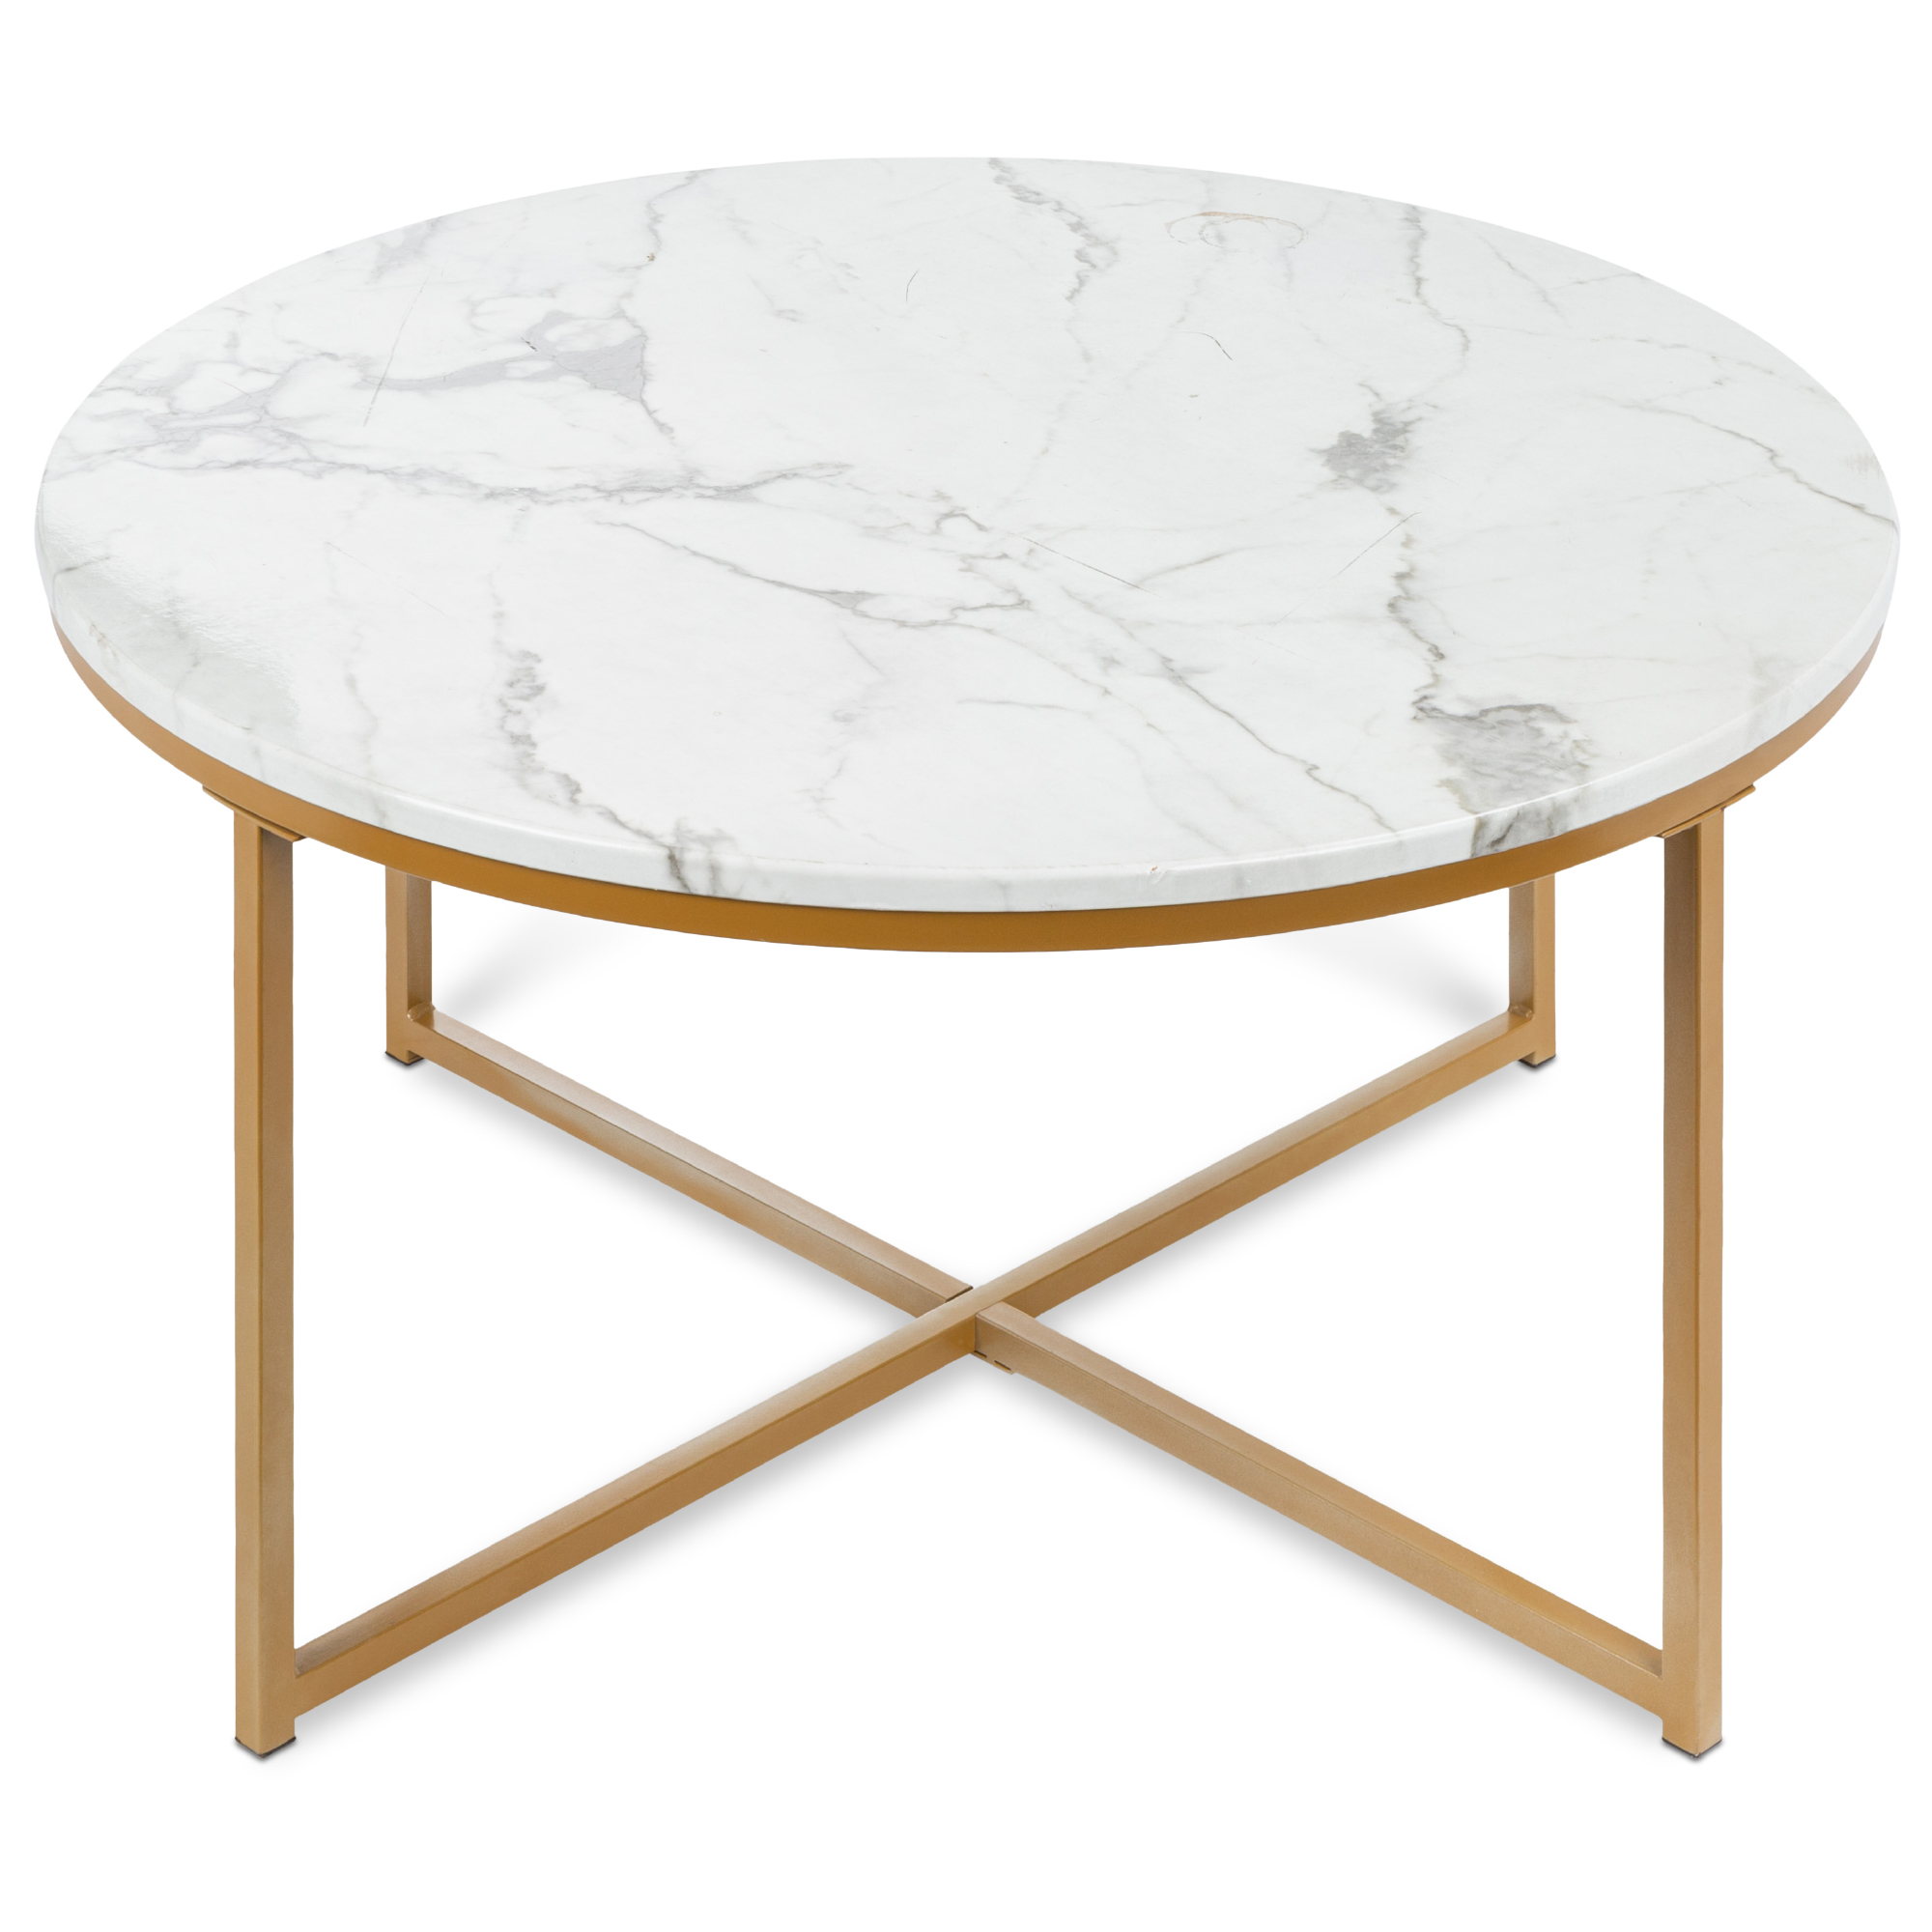 Buy Best Choice Products 36in Faux Marble Modern Living Room Round Accent Side Coffee Table W Metal Frame